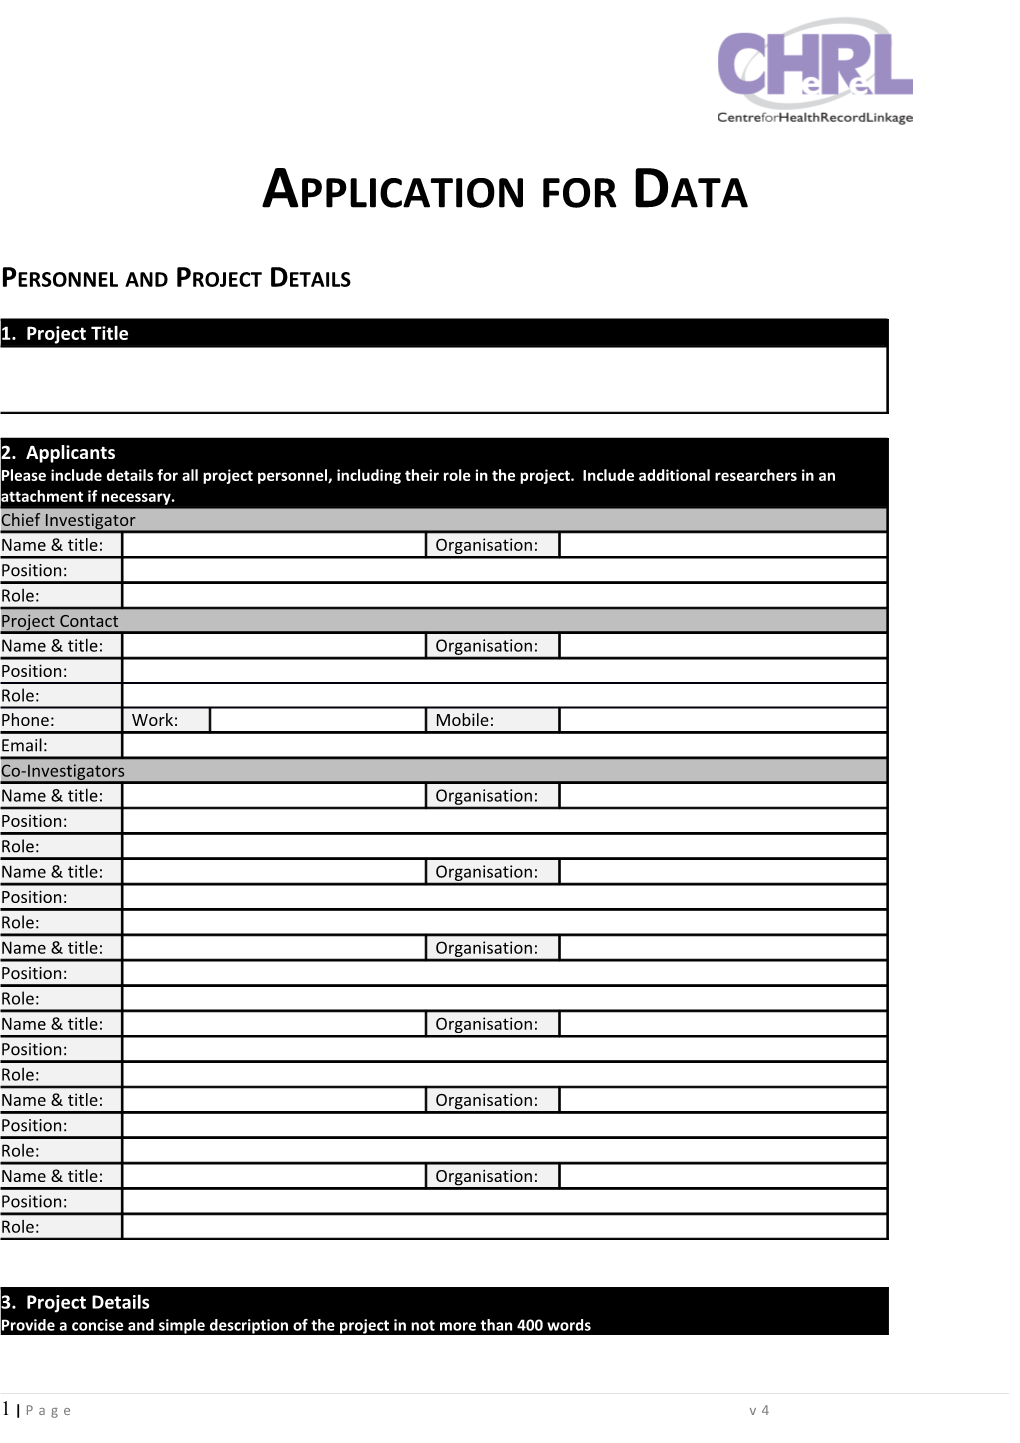 Personnel and Project Details